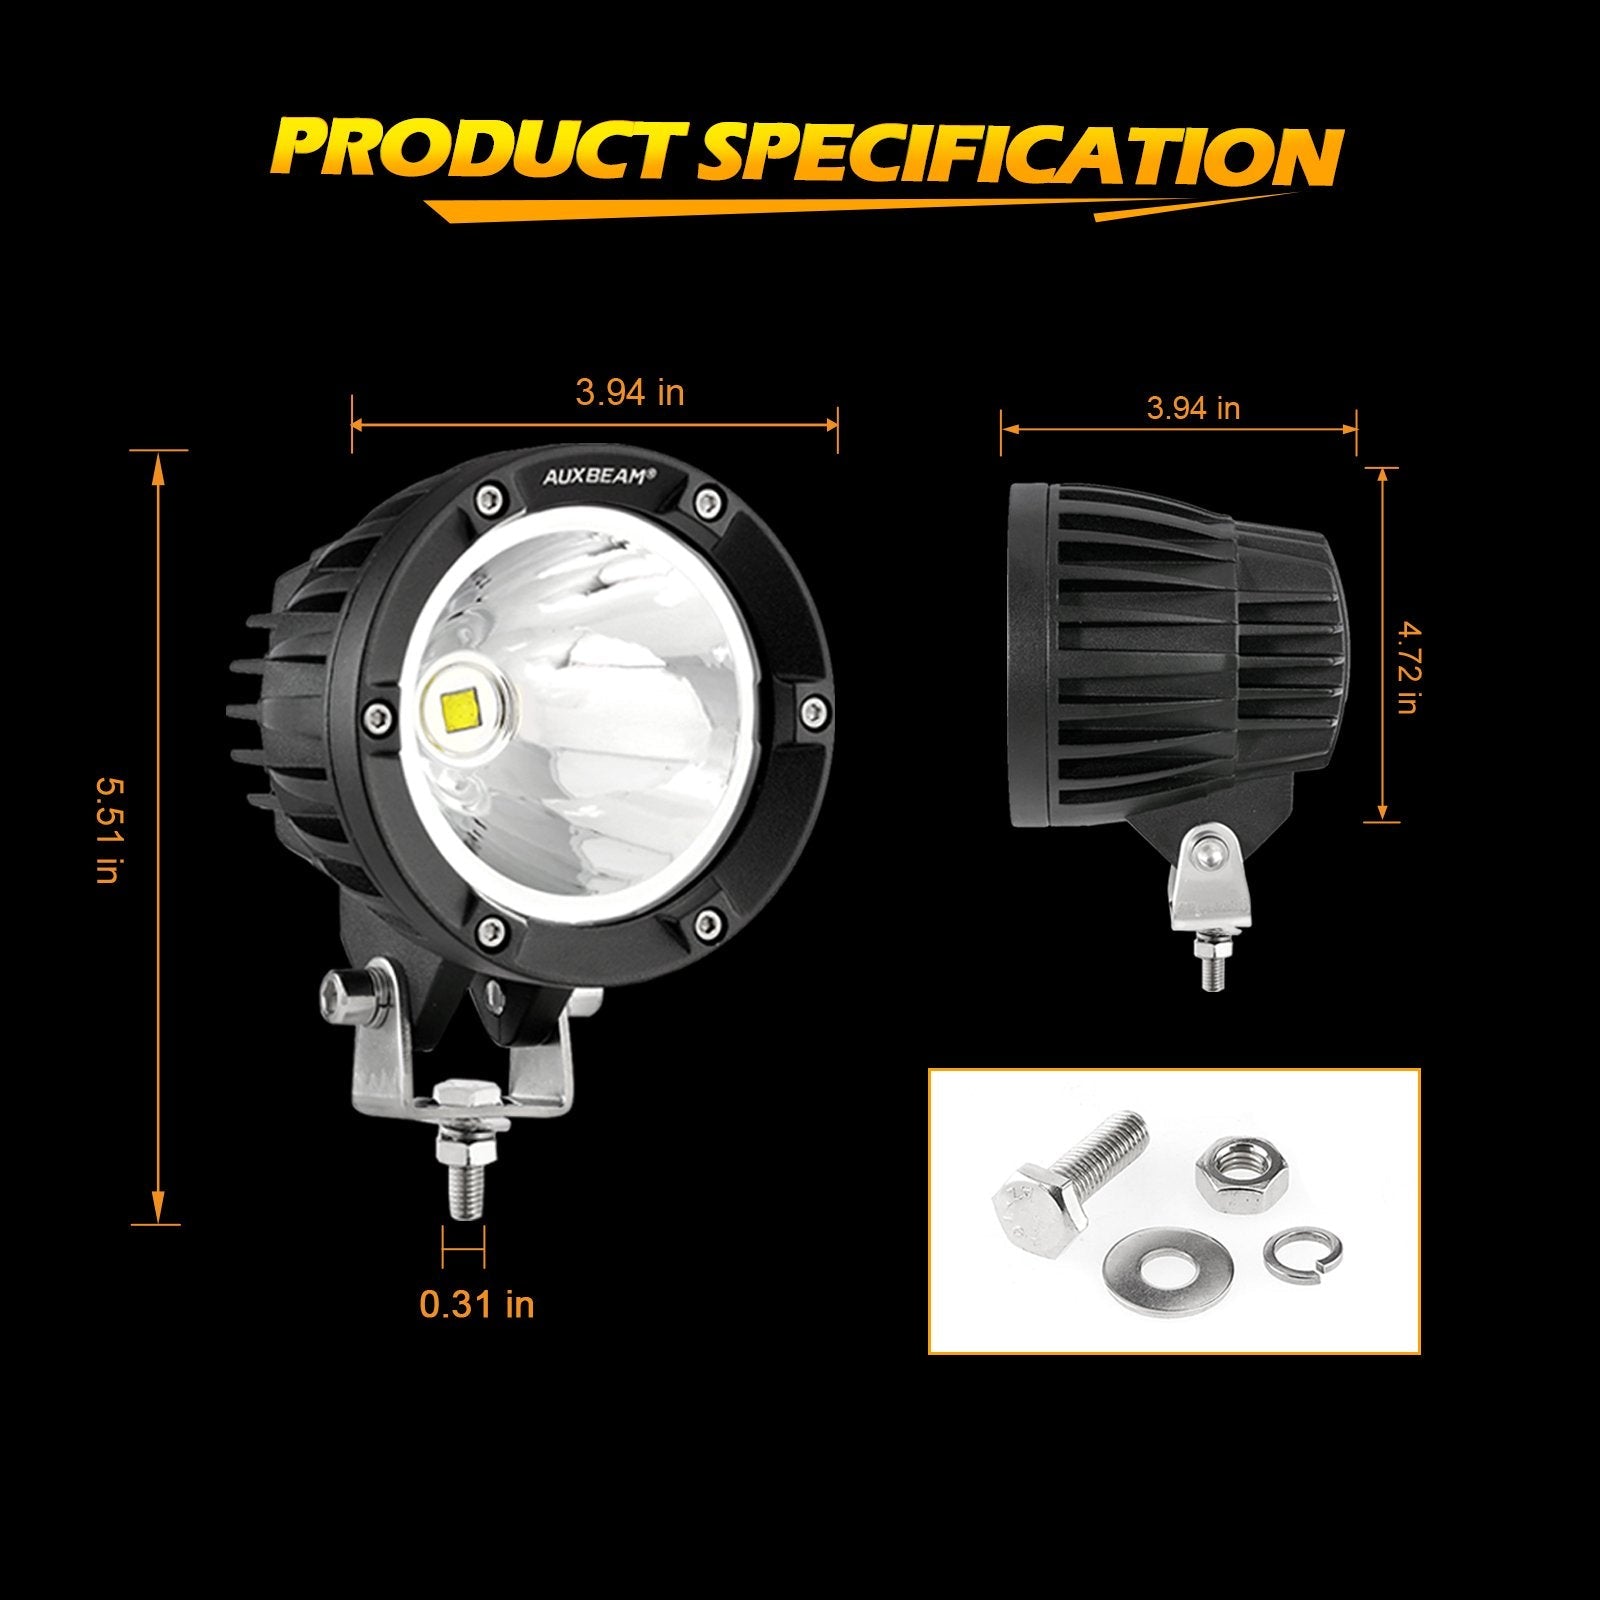 4 Inch 72W Round LED Driving Lights Pods Spot White/Amber with Wiring Harness for SUV ATV UTV Trucks Pickup Boat